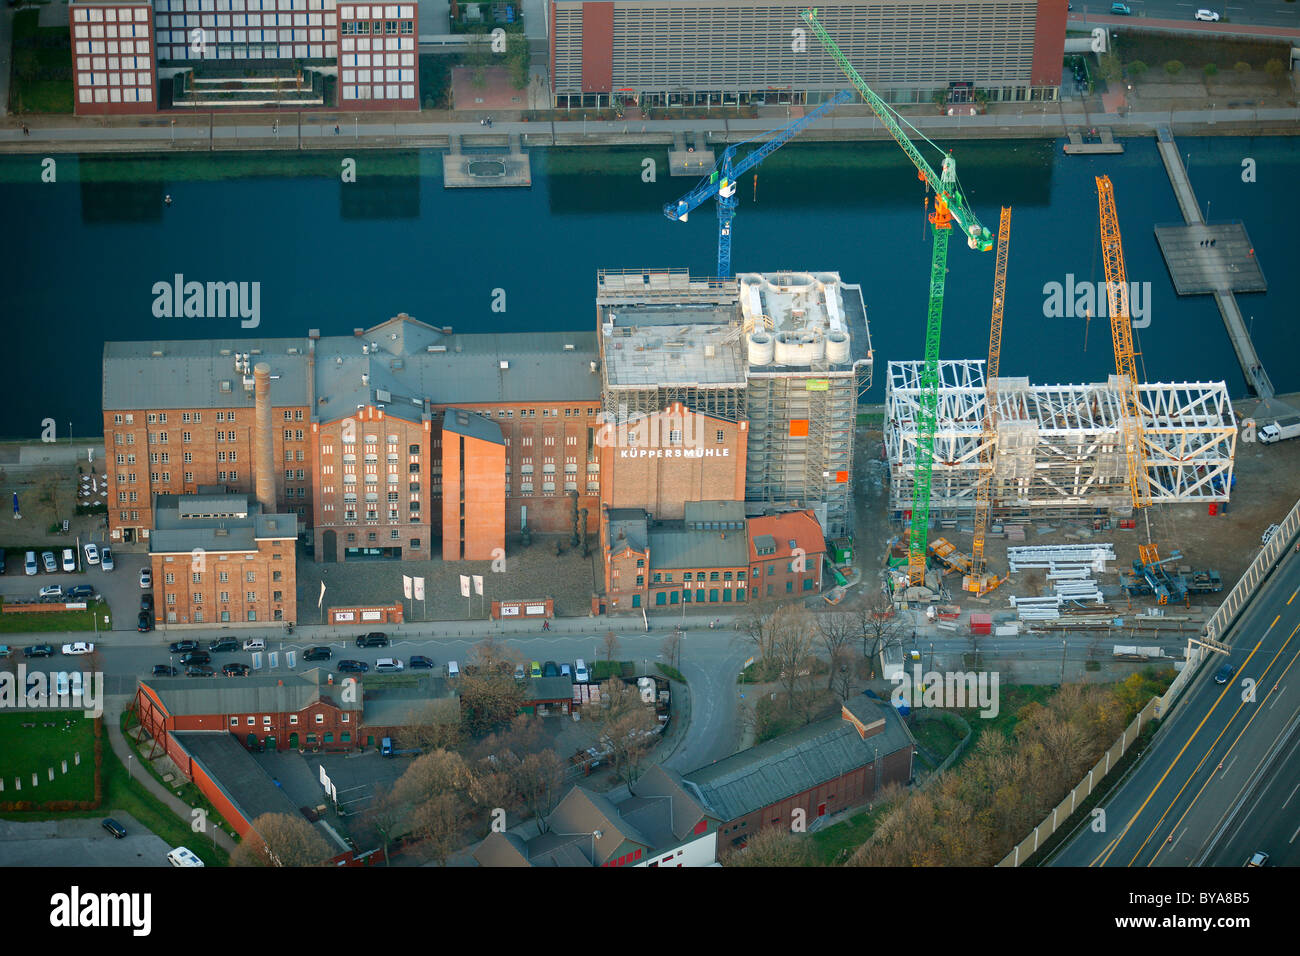 Aerial view, Innenhafen harbor, Museum Kueppersmuehle, controversial remodelling, Duisburg, Ruhrgebiet region Stock Photo